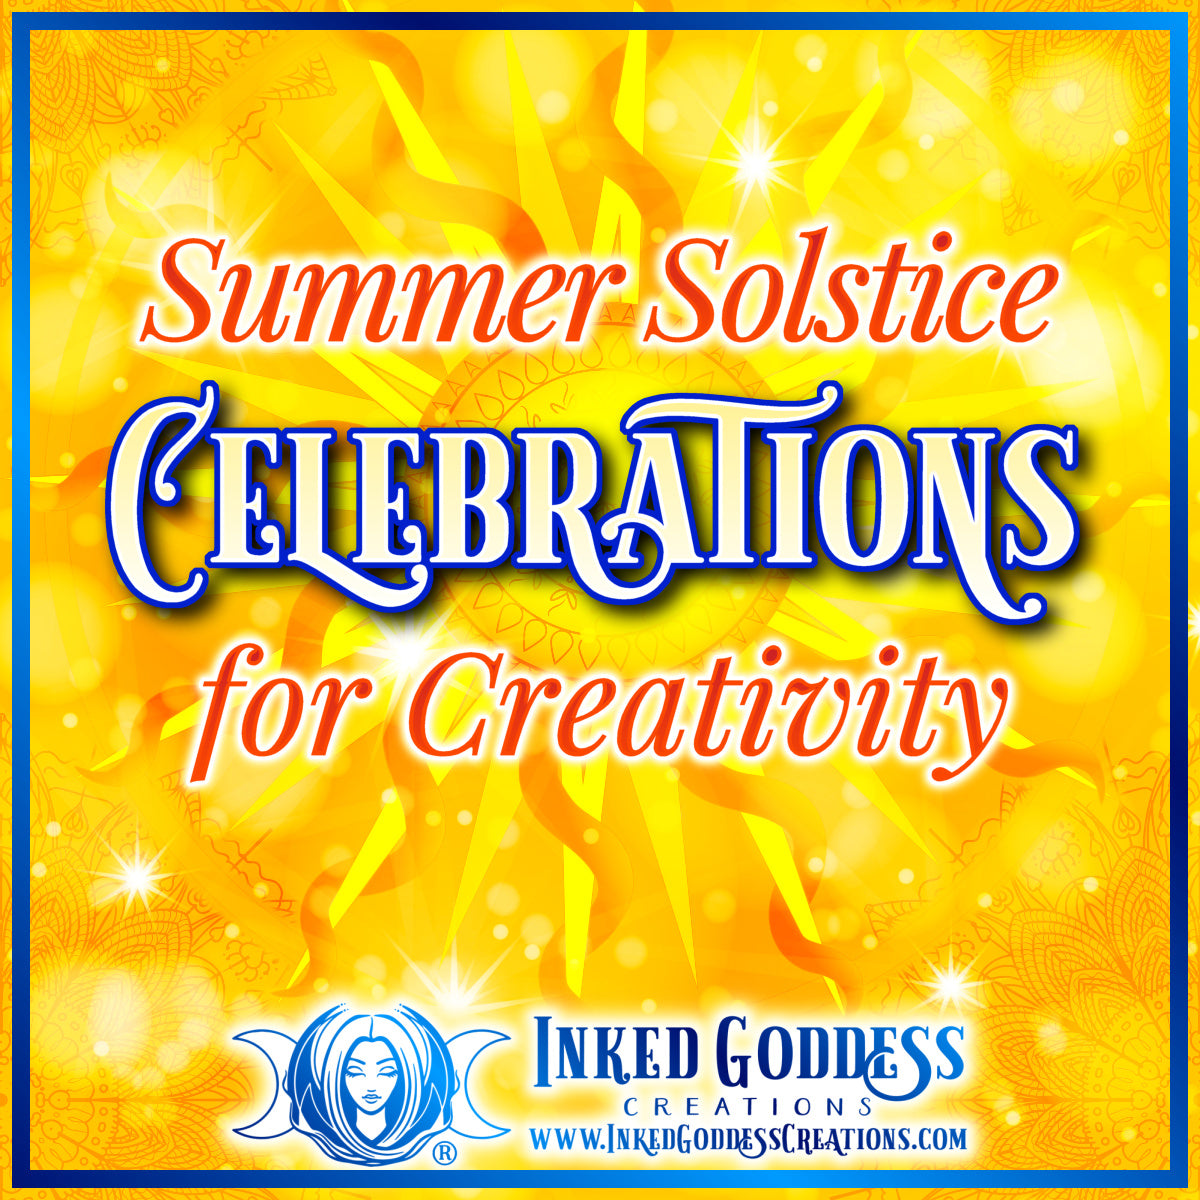 Summer Solstice Celebrations for Creativity